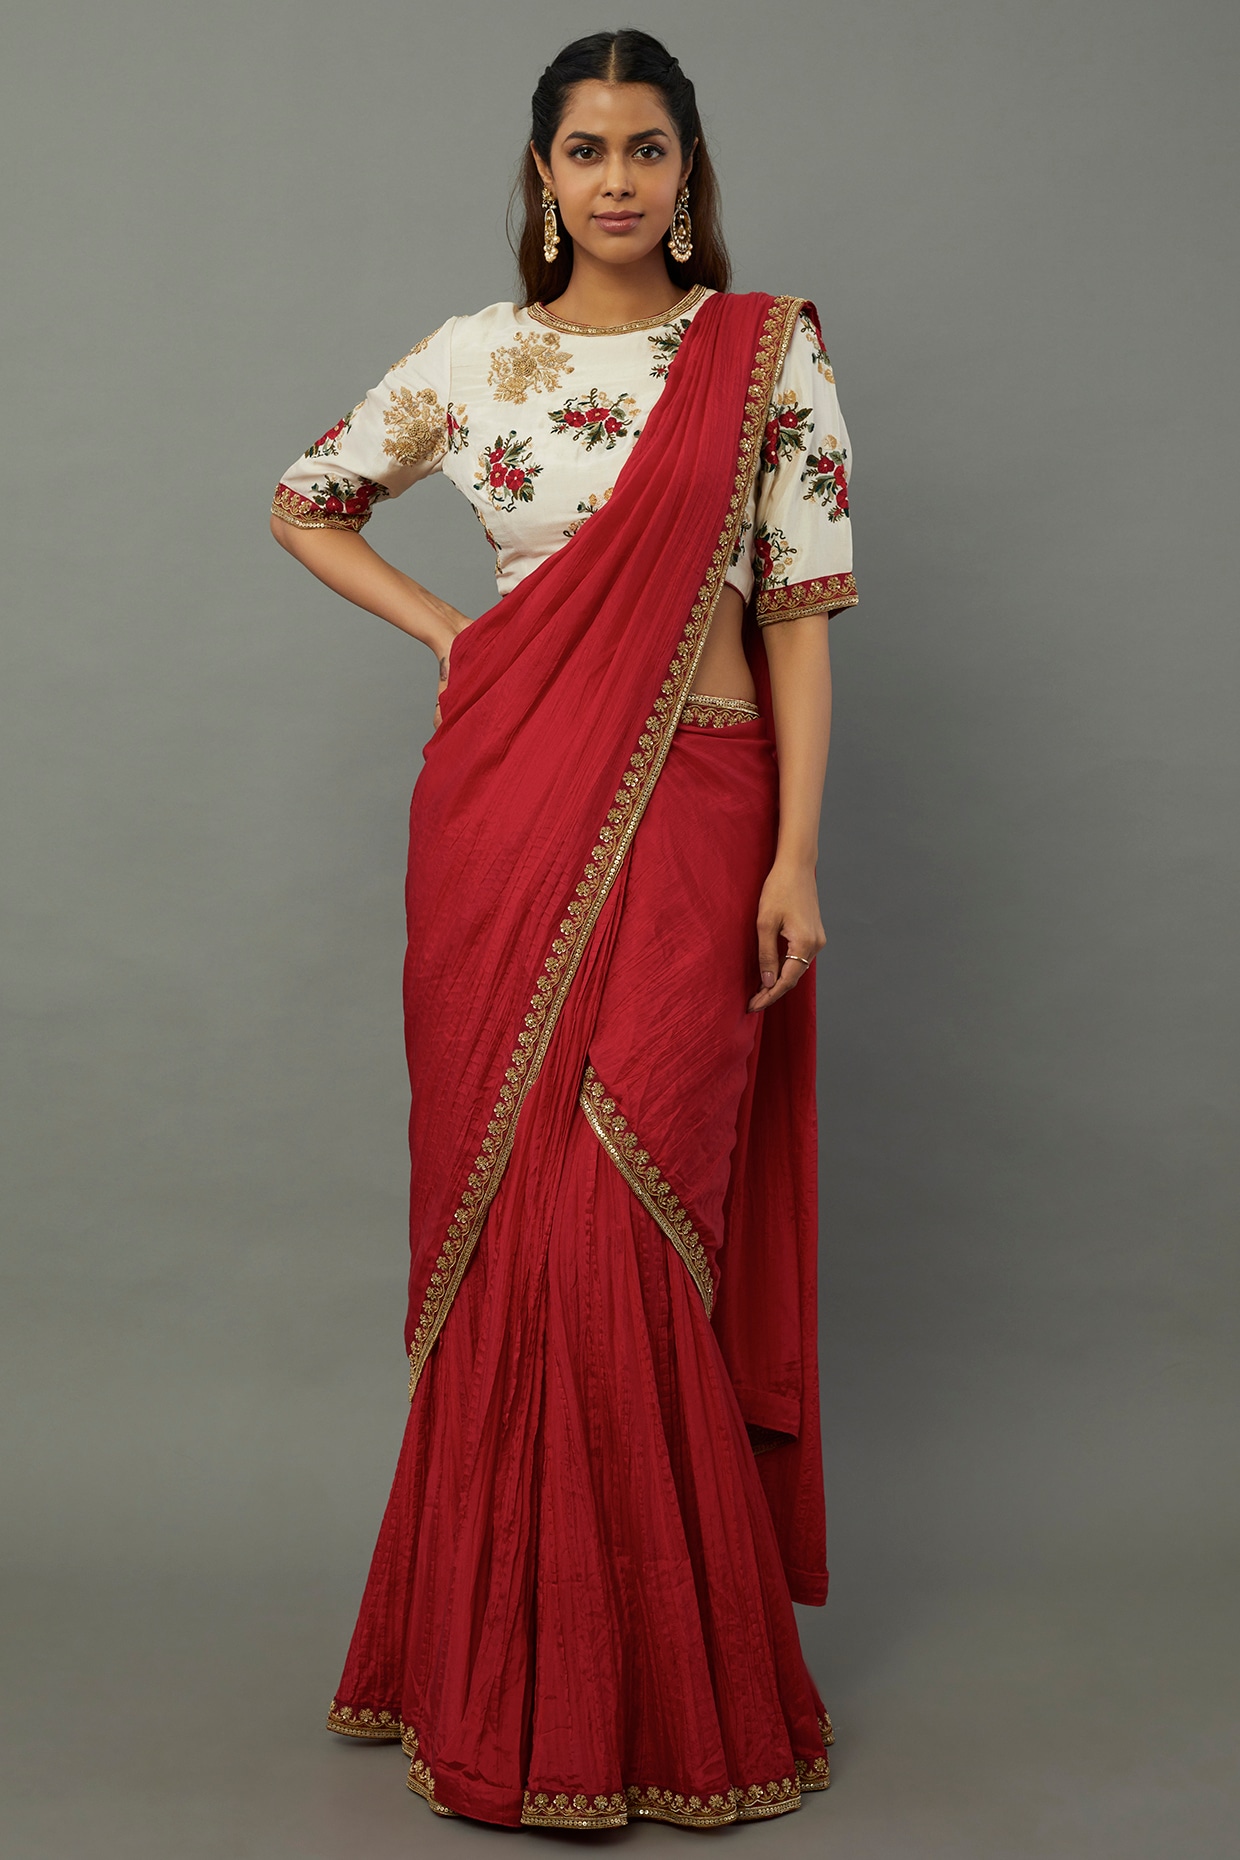 Woman Wearing Red and Gold Saree Wedding Dress · Free Stock Photo